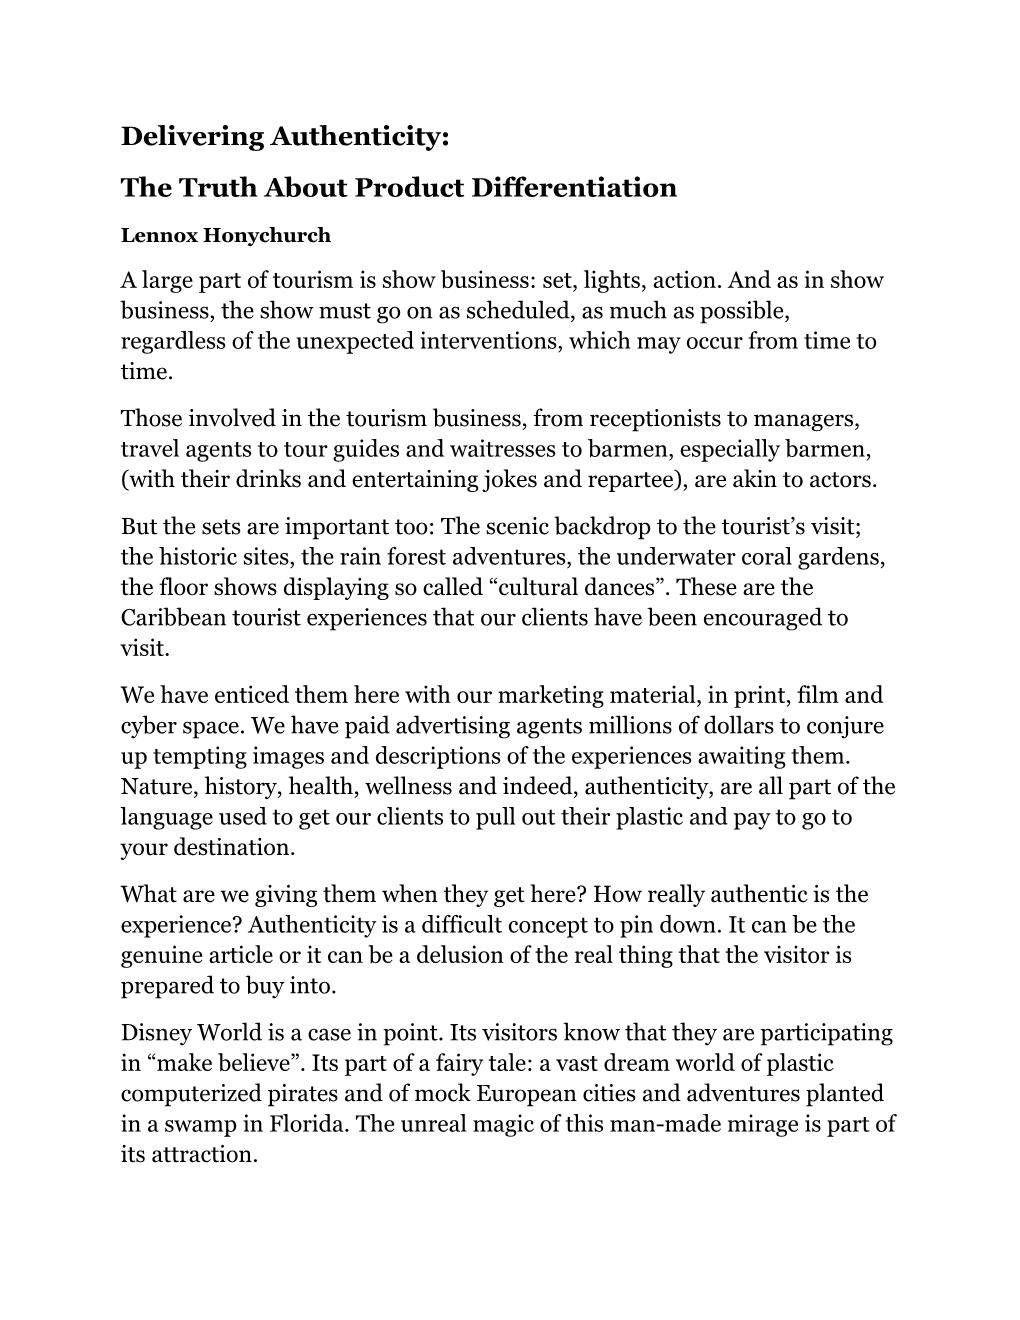 The Truth About Product Differentiation